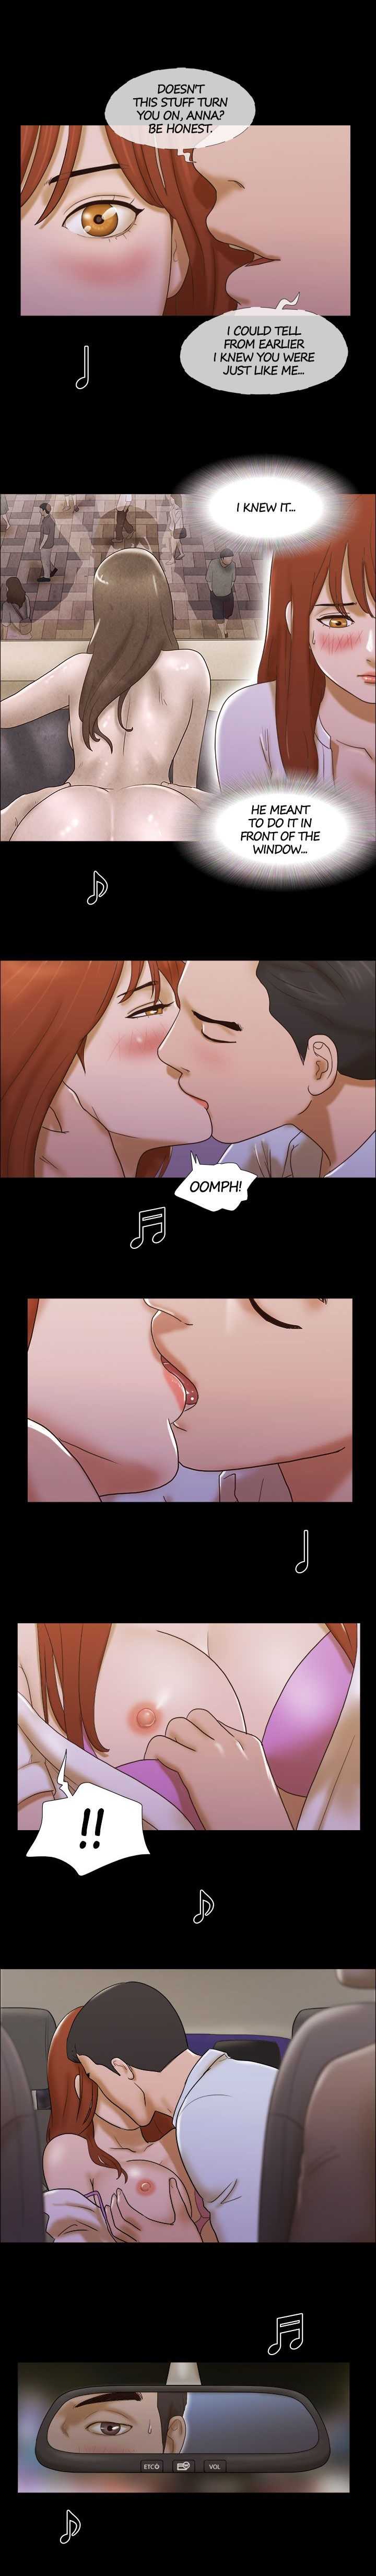 [Mulduck] Couple Game: 17 Sex Fantasies Ver.2 - Ch.41 - 63 END [English] - Page 7